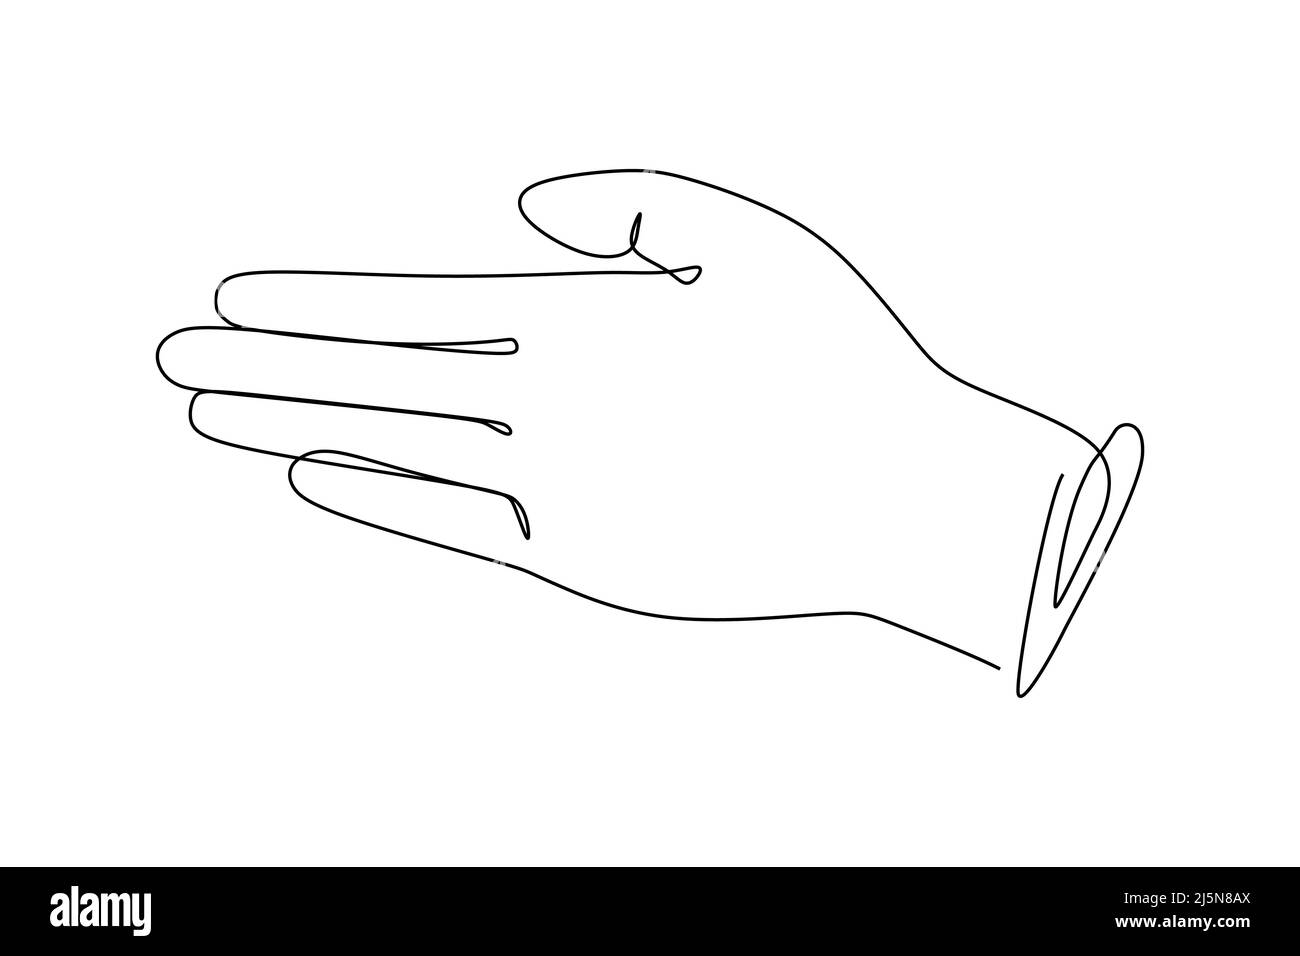 Wrist Palm gesture. Different position of the fingers. Sign and symbol of hand gestures. Single continuous drawing line. Hand drawn style art doodle Stock Vector